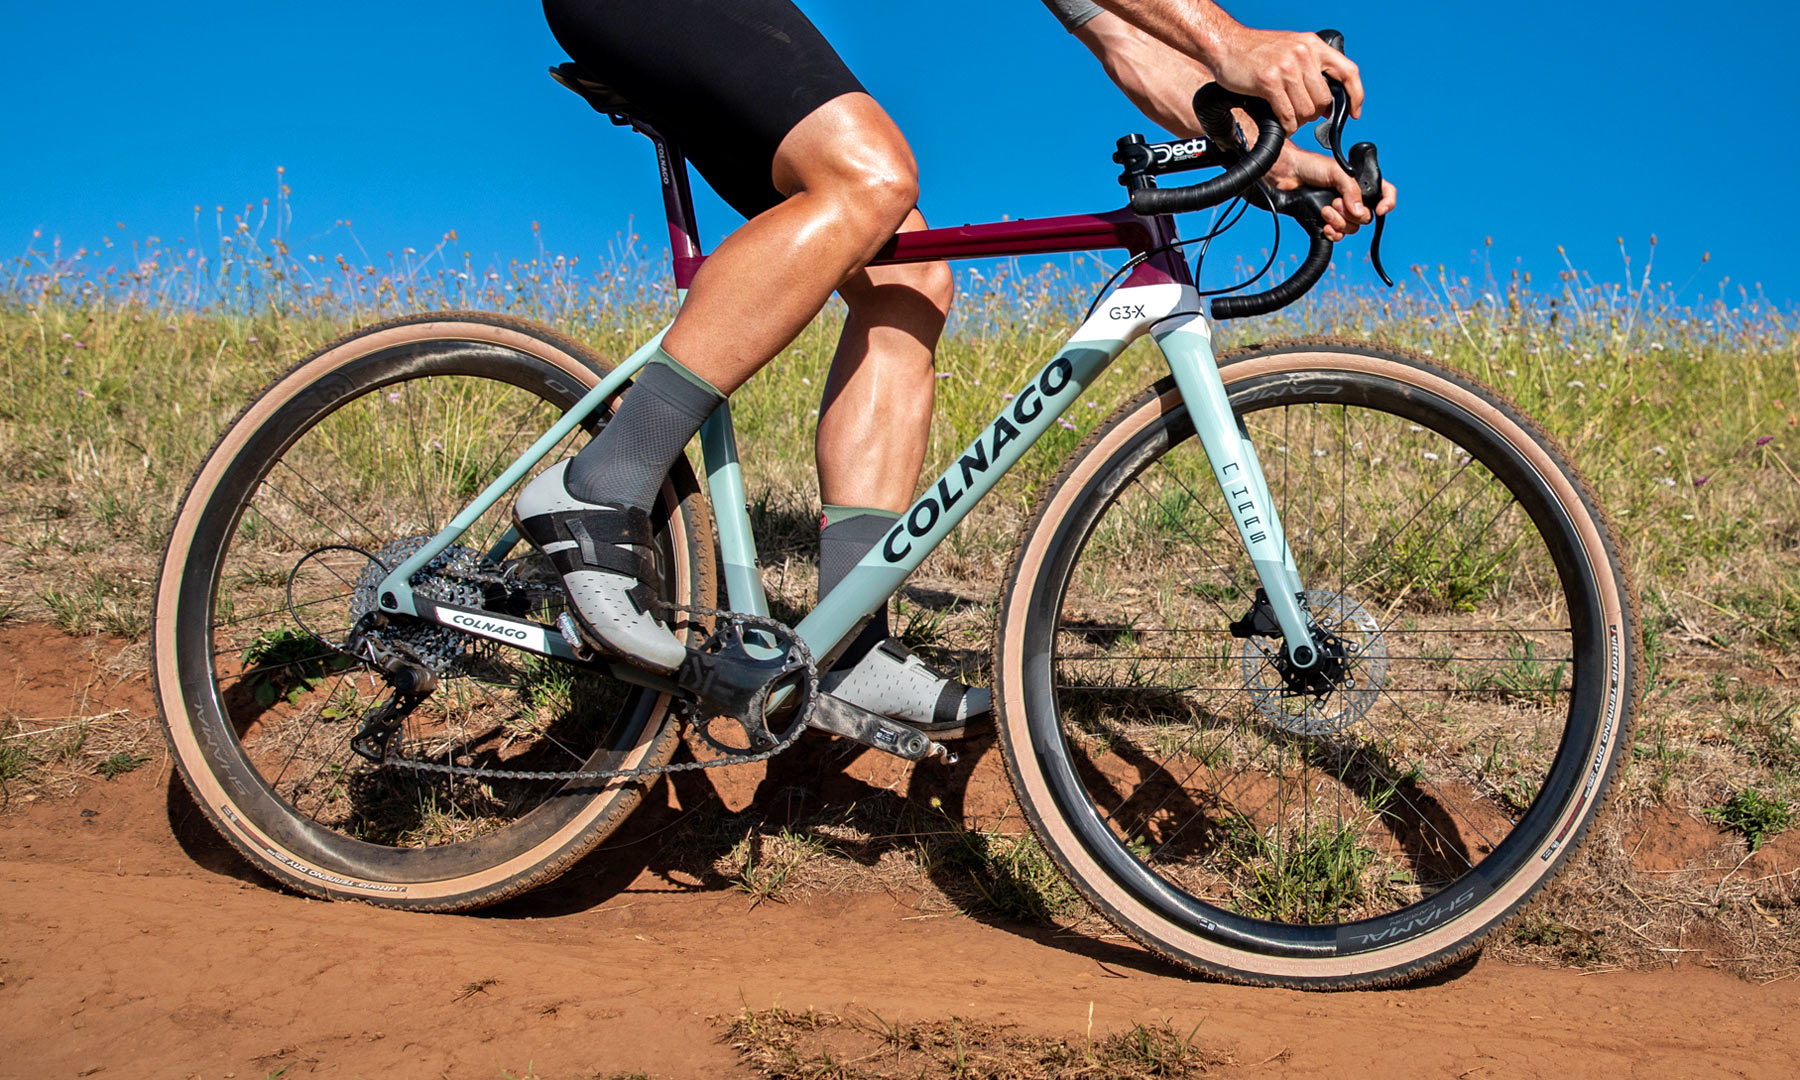 Colnago G3-X gravel race bikes for Nathan Haas, photo by Laura Fletcher, riding